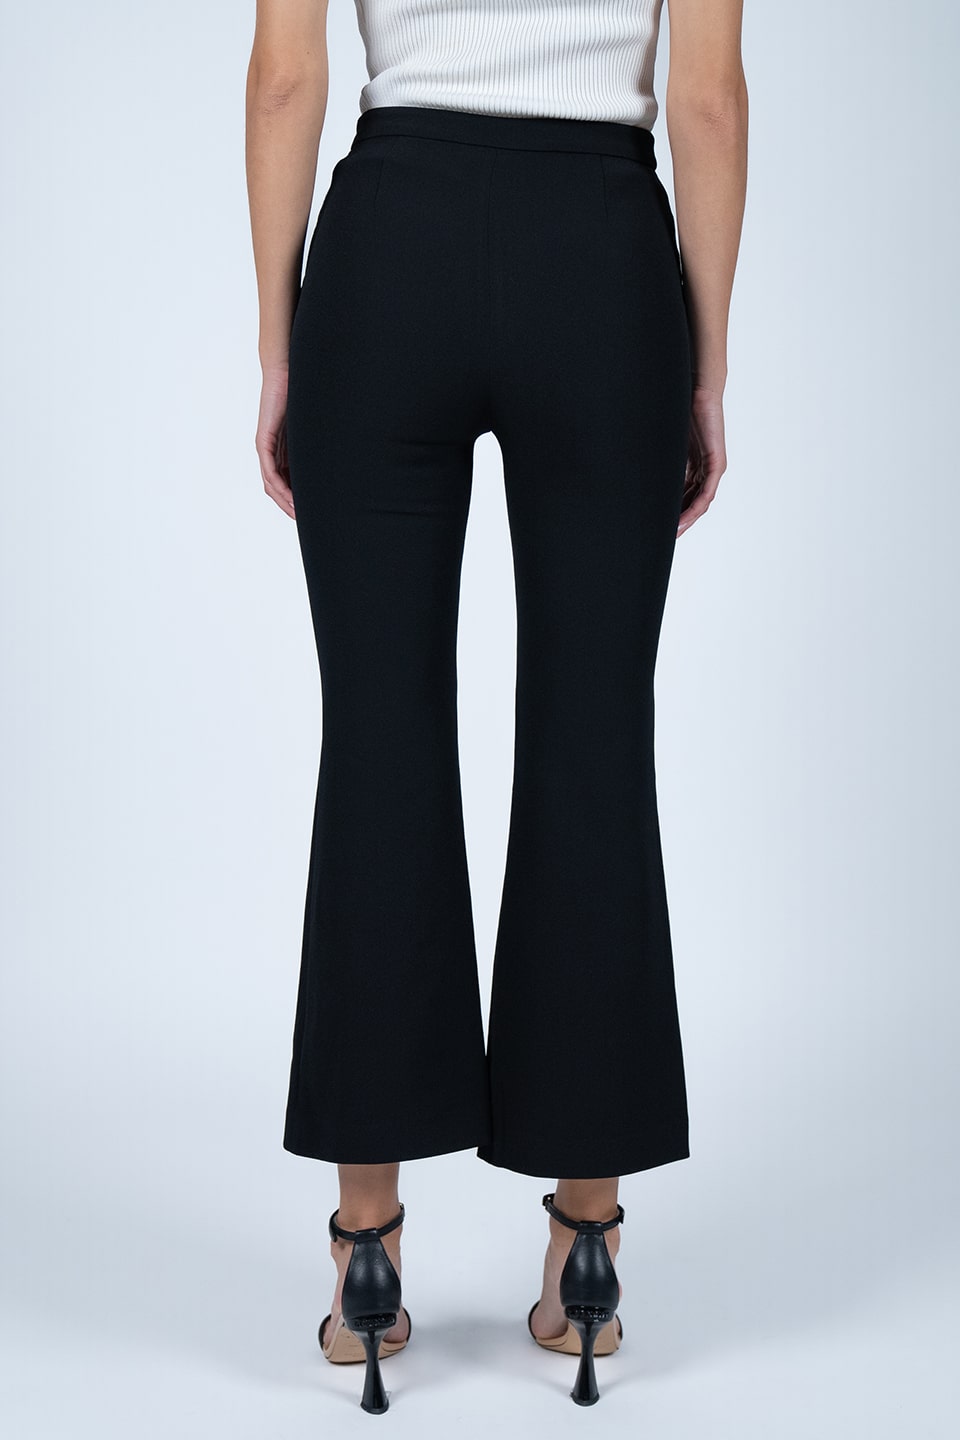 Designer Black Women pants, shop online with free delivery in UAE. Product gallery 3